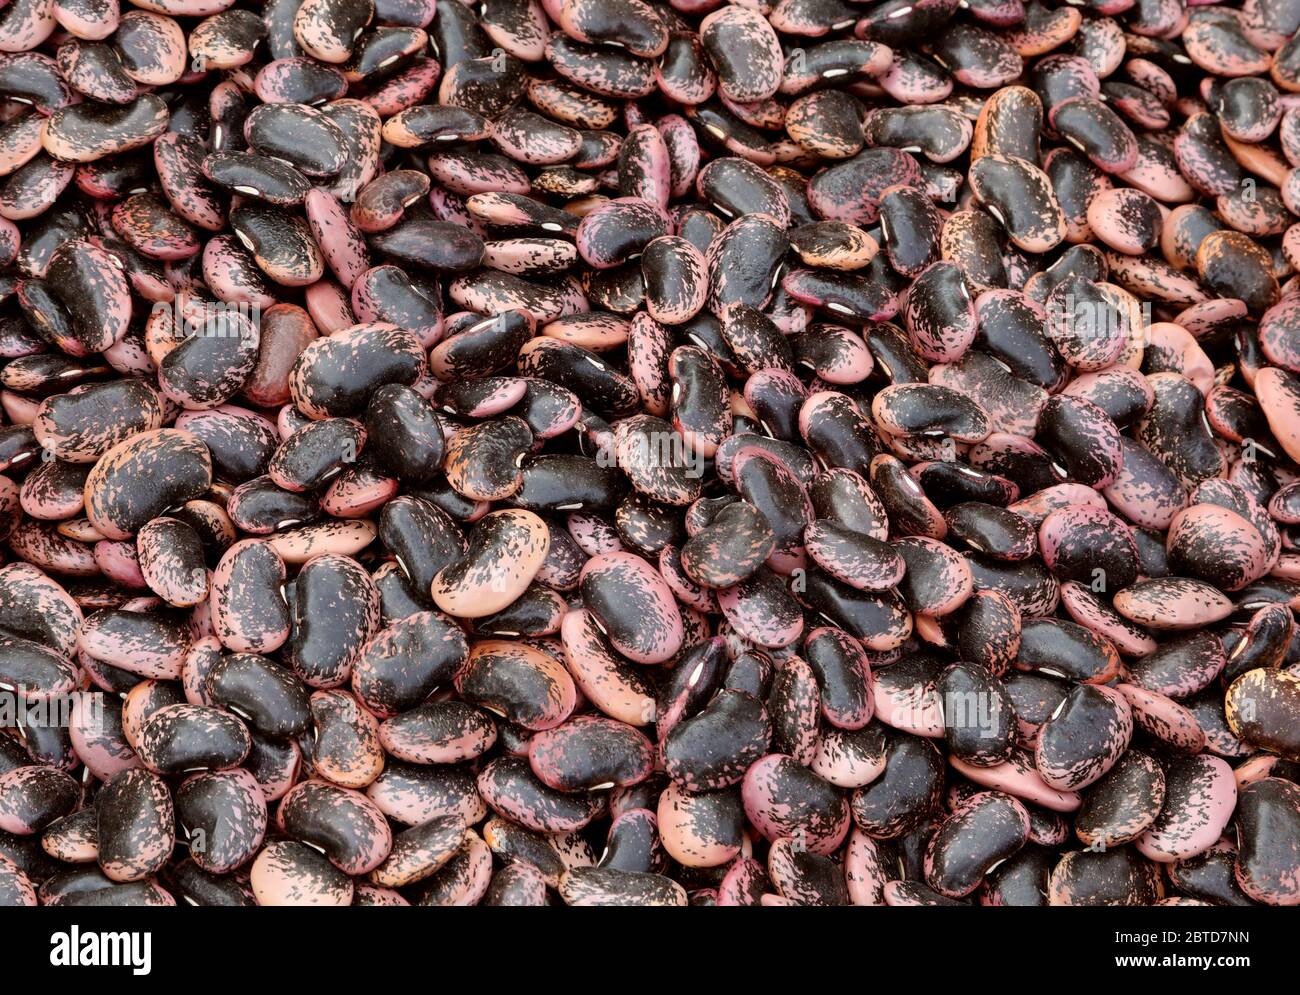 dried beans of a species called in Italy Pope beans or Fagioli del Papa in Italian language Stock Photo